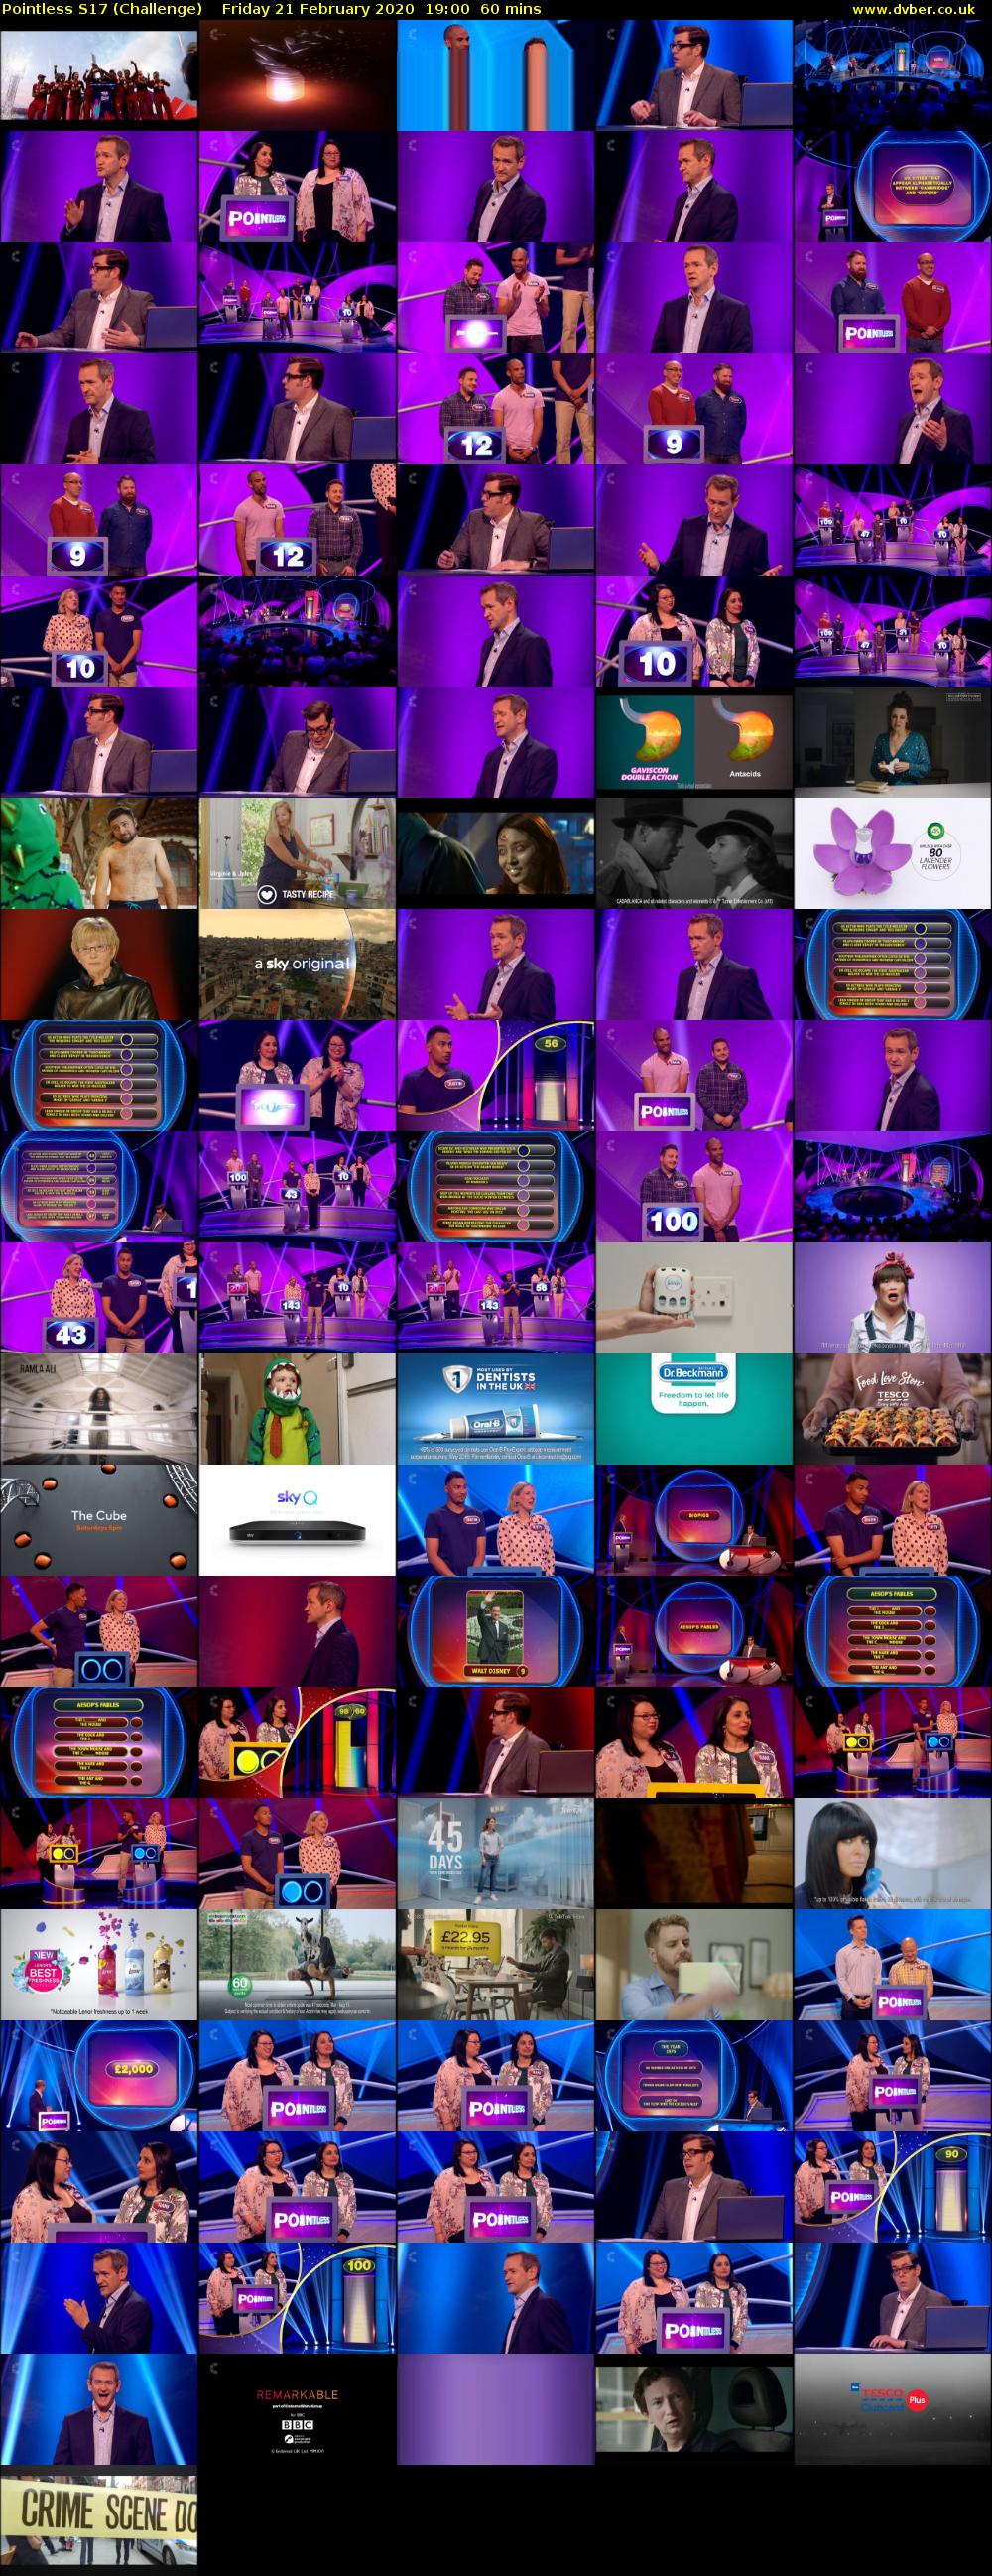 Pointless S17 (Challenge) Friday 21 February 2020 19:00 - 20:00